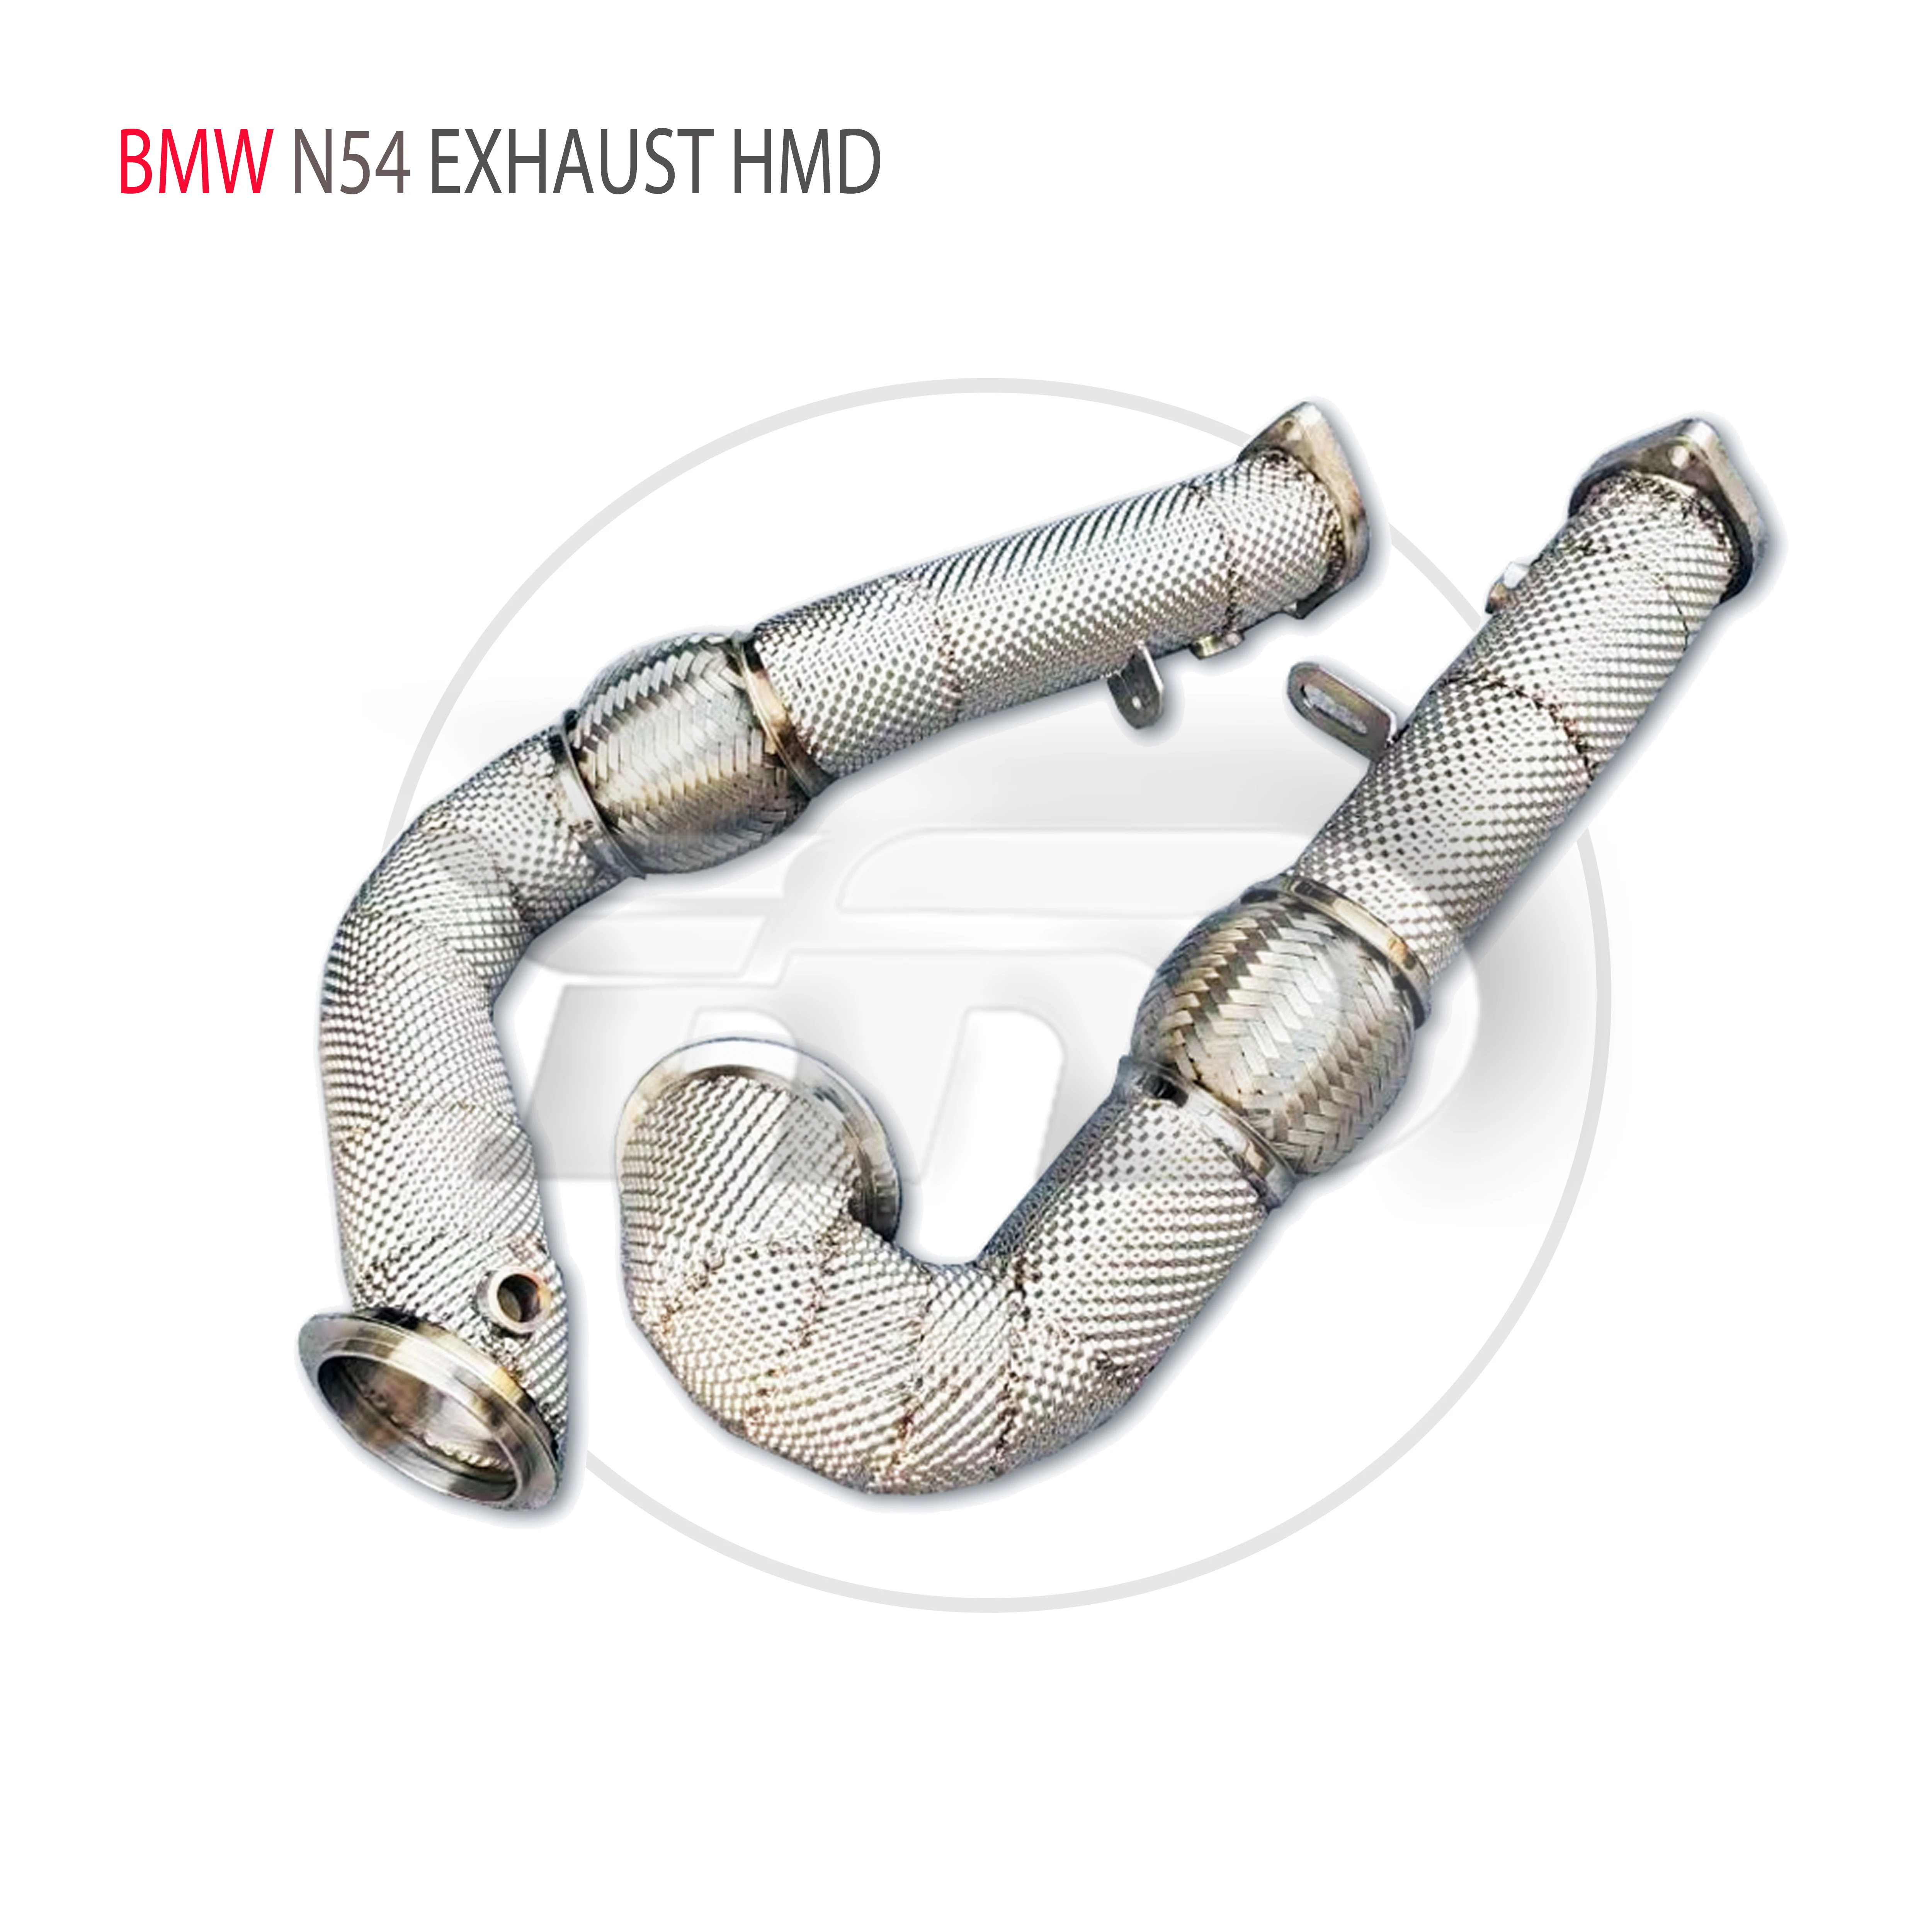 

HMD Exhaust System High Flow Performance Downpipe for BMW Z4 E89 N54 Engine 3.0T 2008-2012 Car Accessories With Cat Pipe